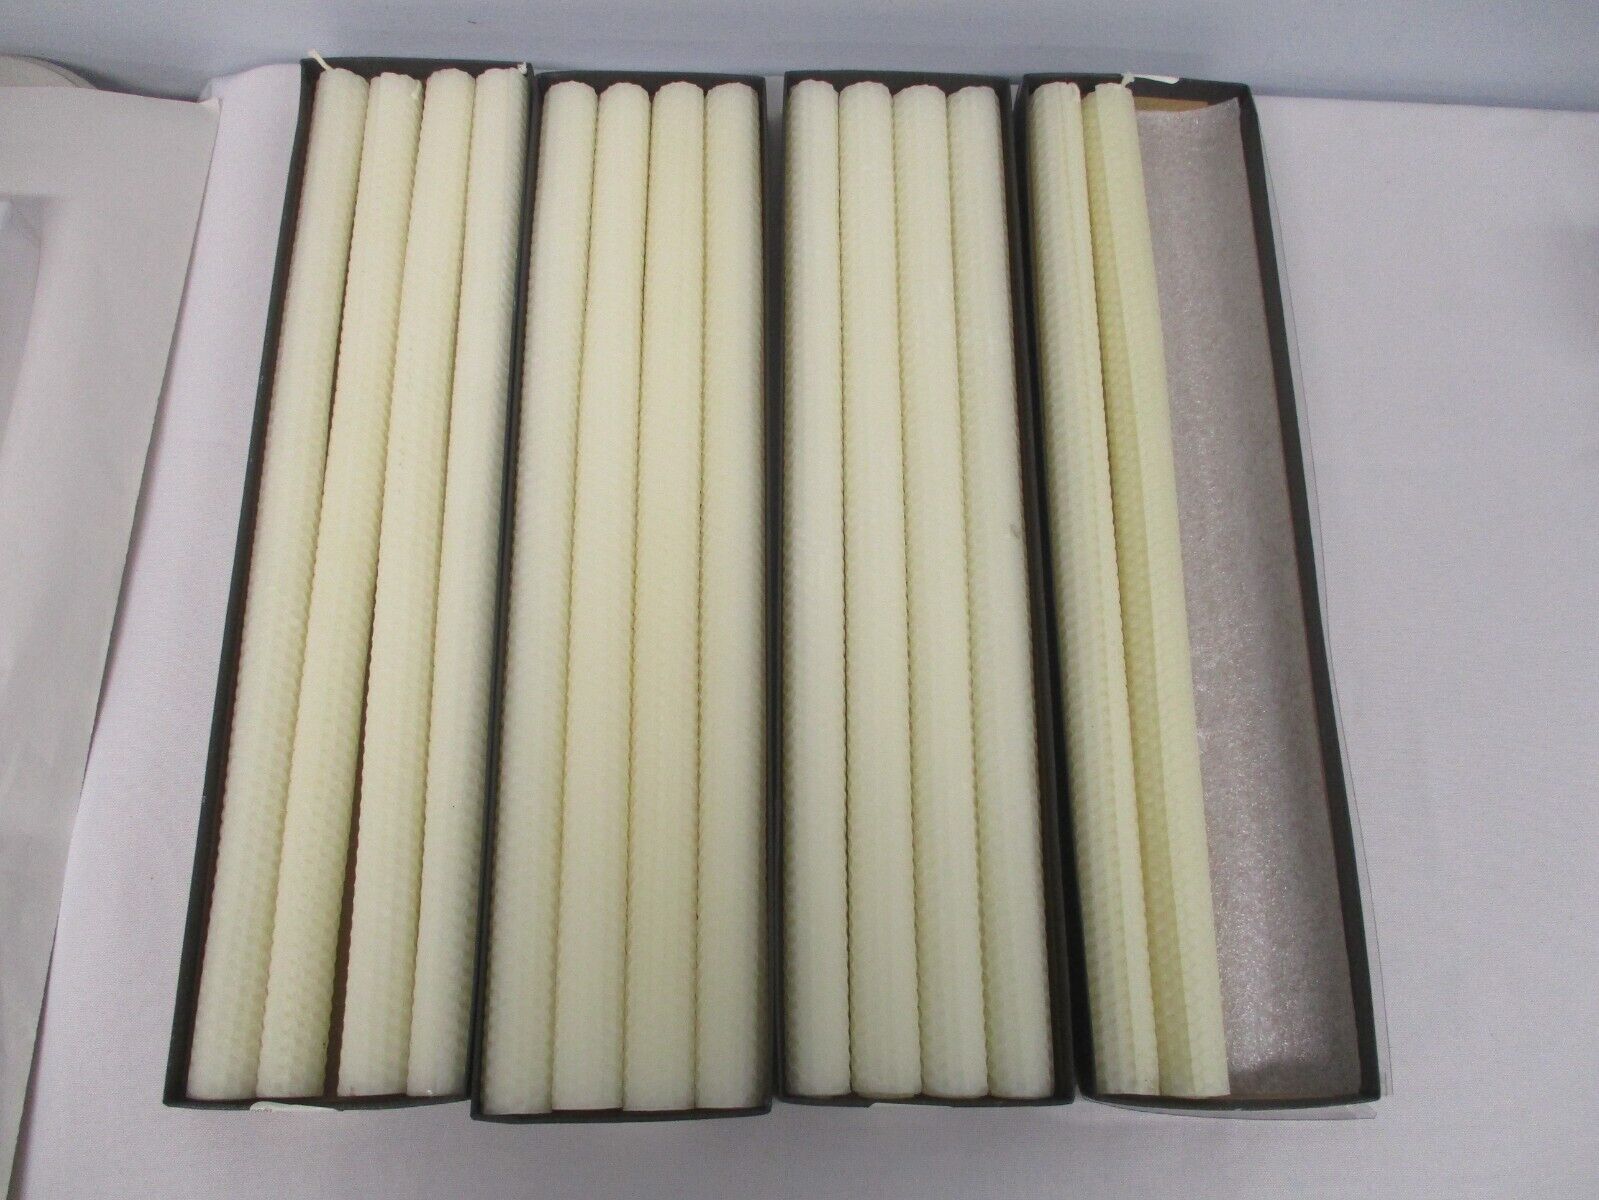 14 PERIN-MOWEN HAND ROLLED HONEYCOMB BEESWAX CANDLES 16\